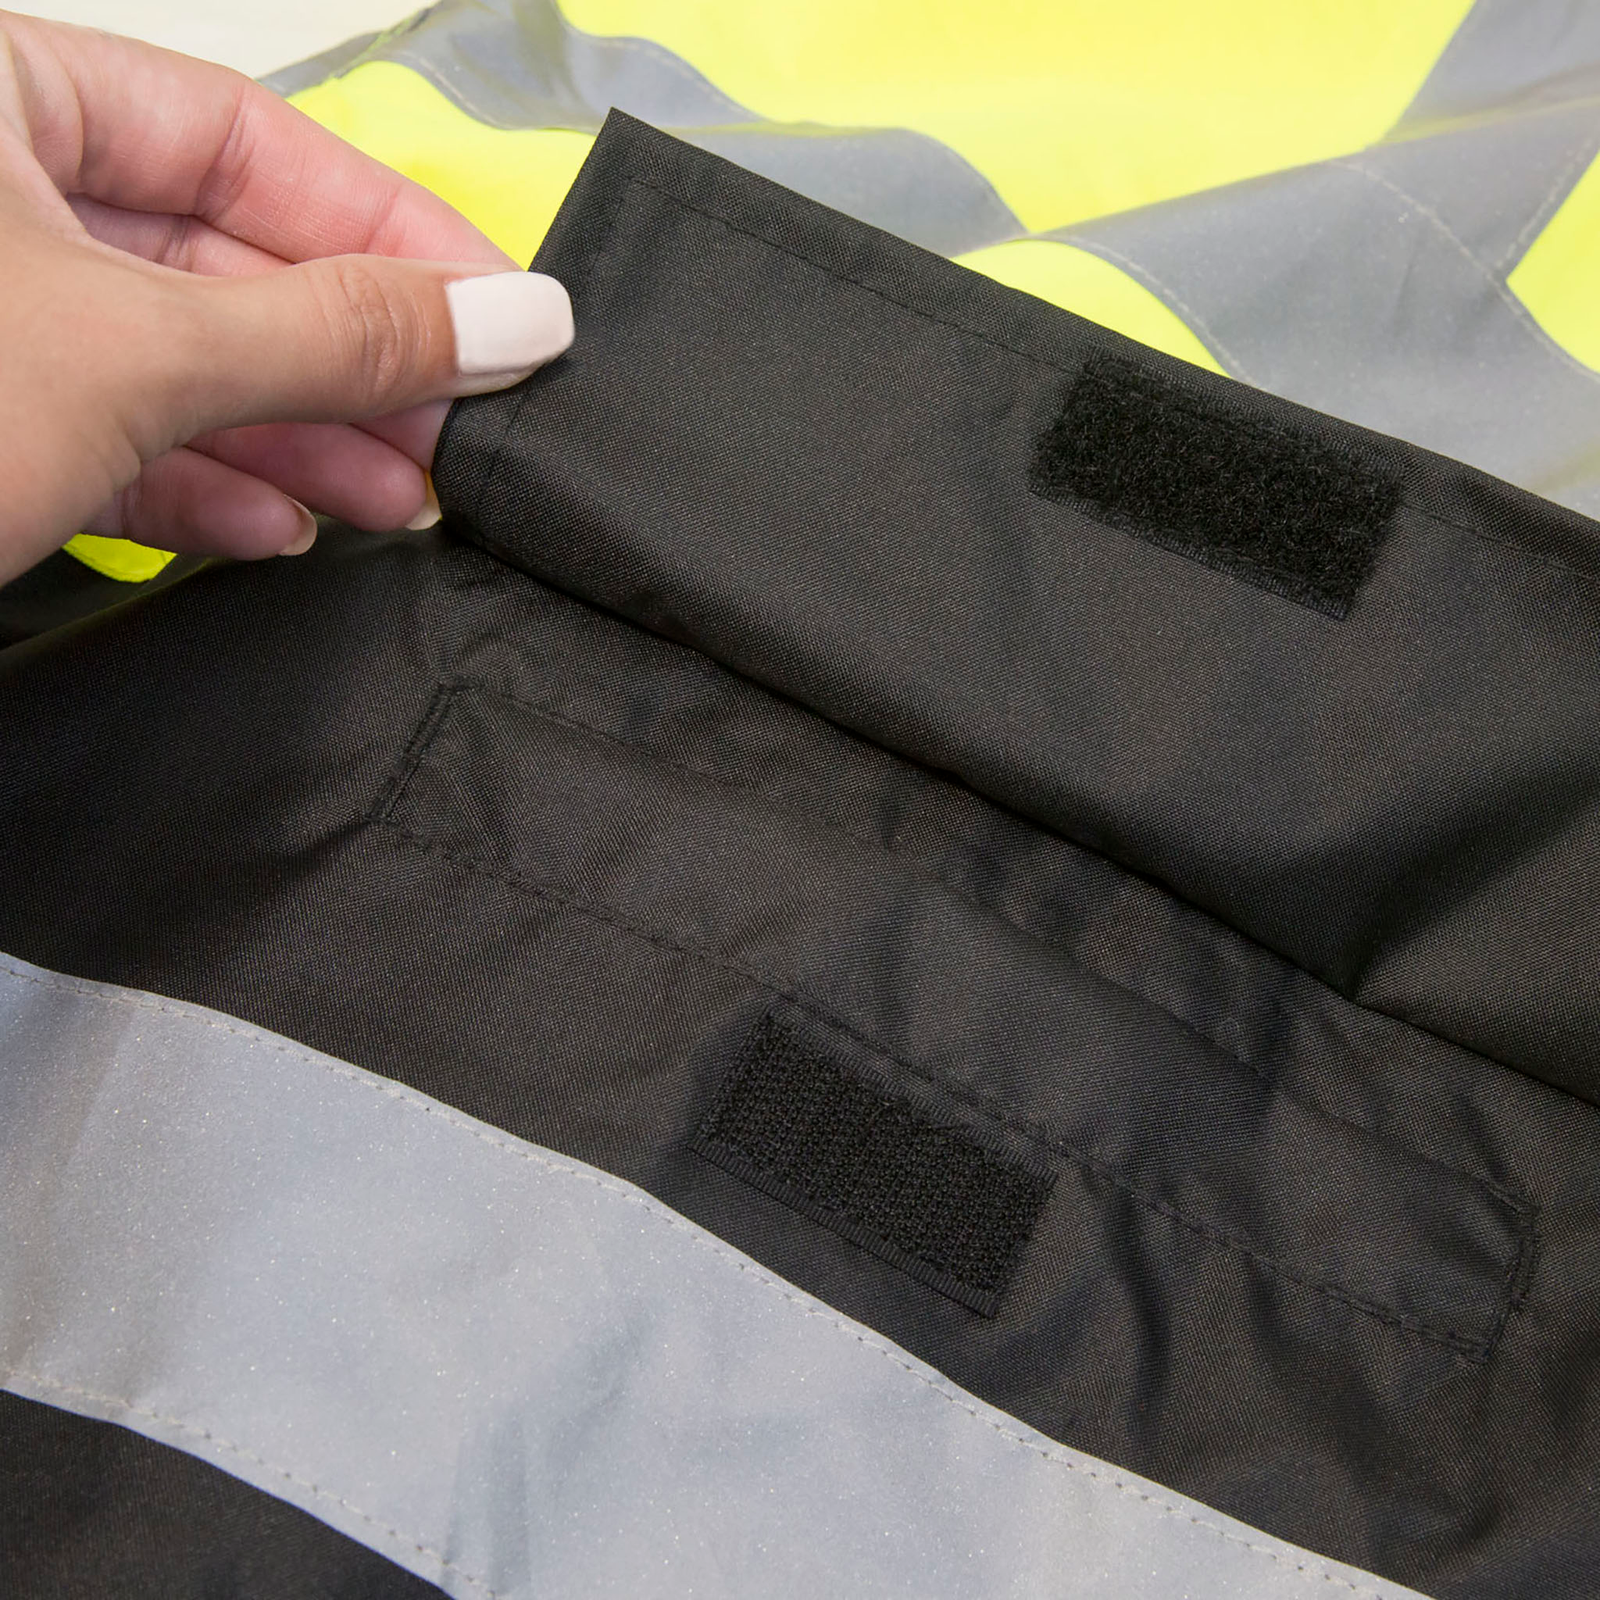 High vis rain jacket with waist pockets and flaps with hook and loop closures for improve rain protection